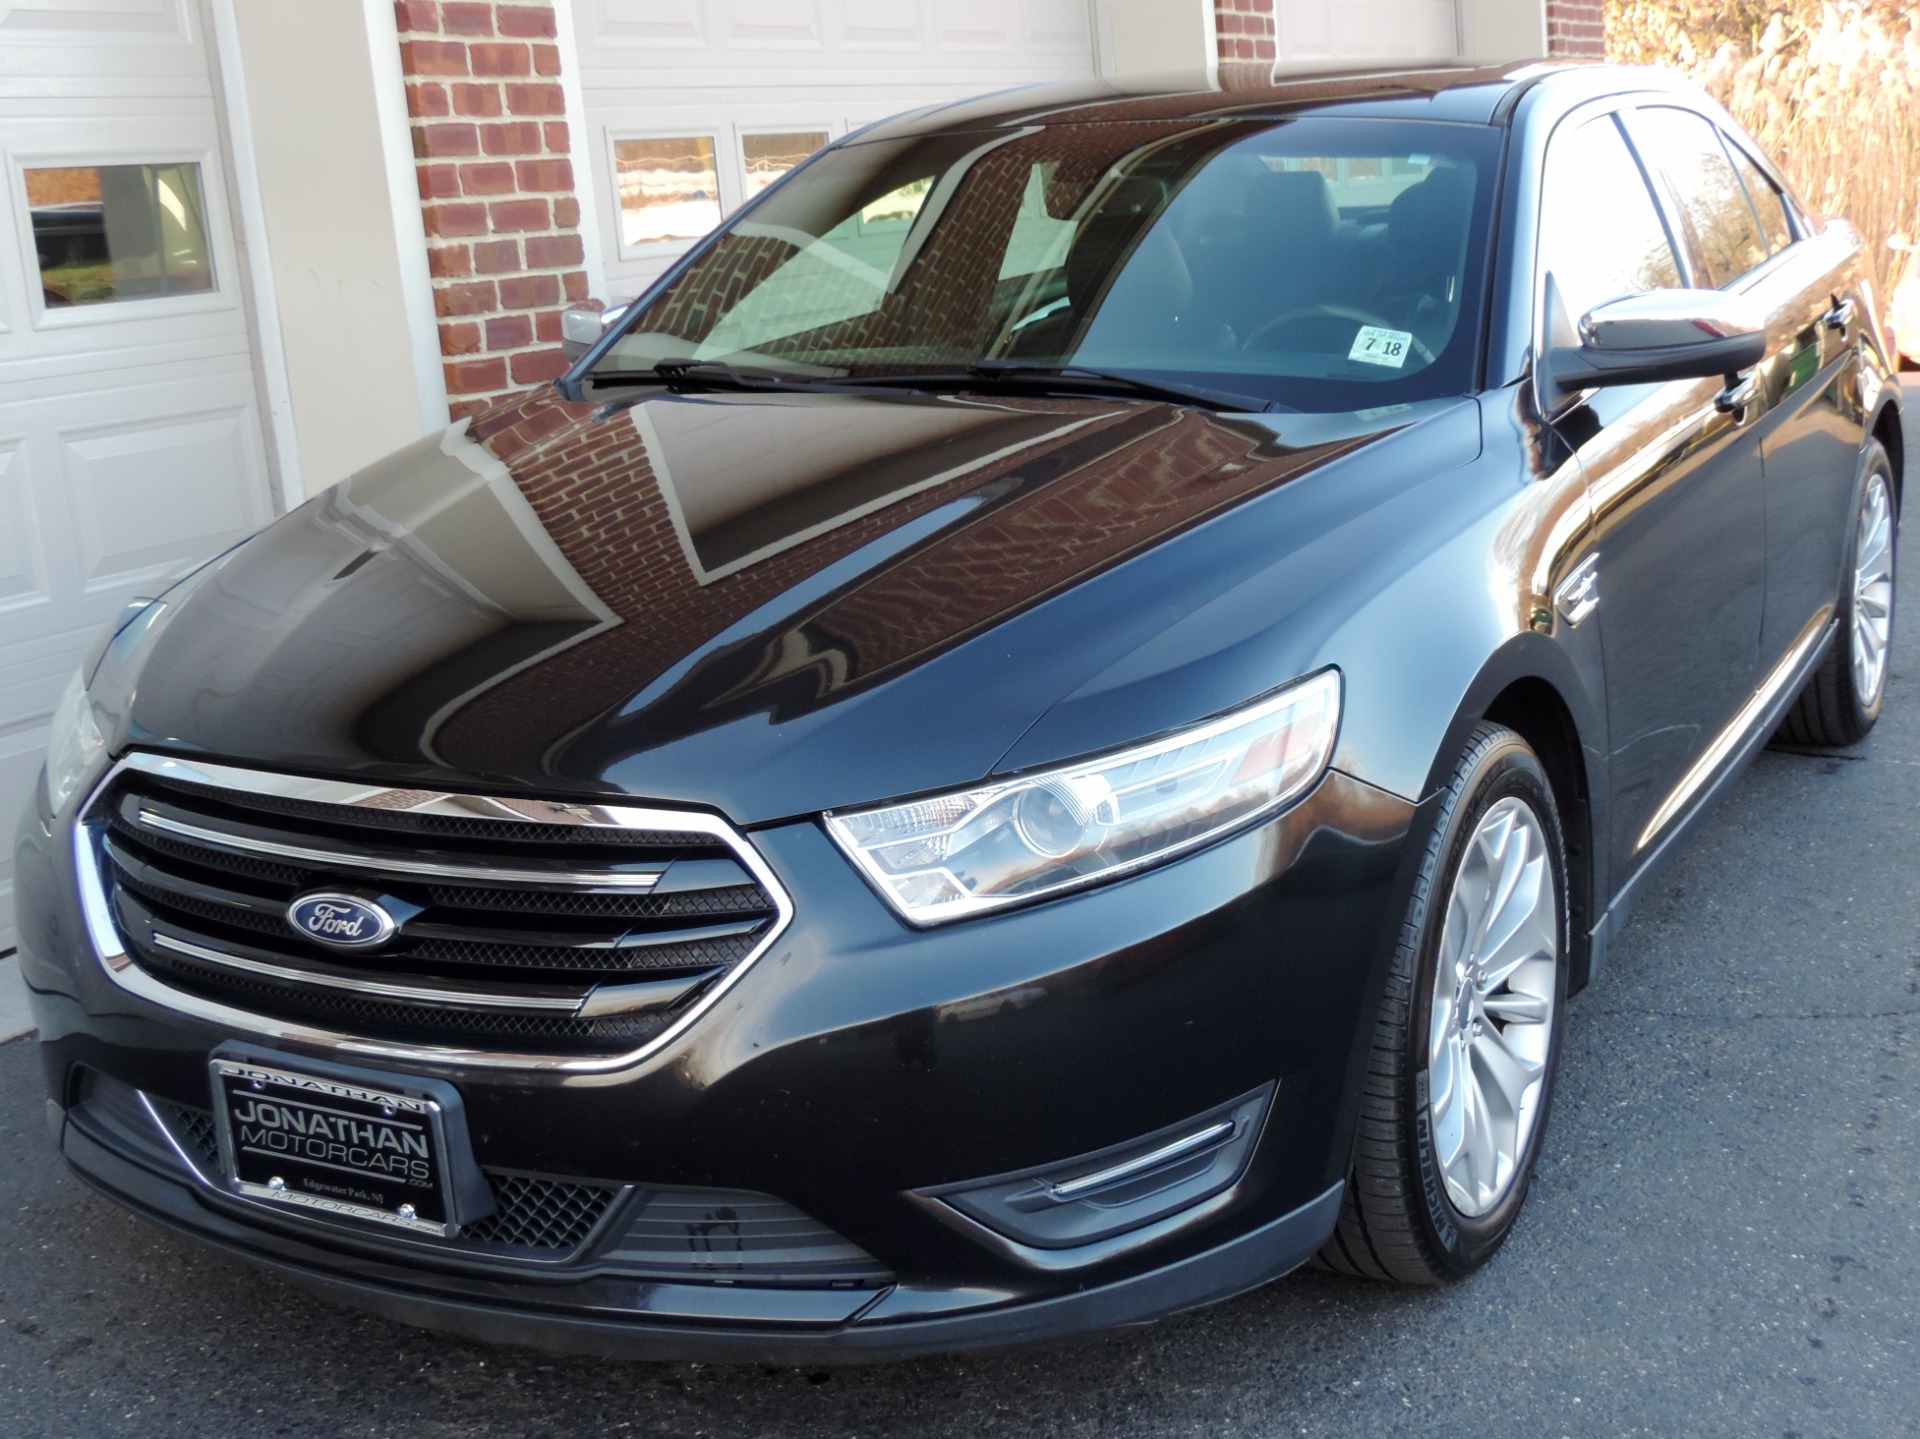 2013 Ford Taurus Limited Stock # 121917 for sale near Edgewater Park